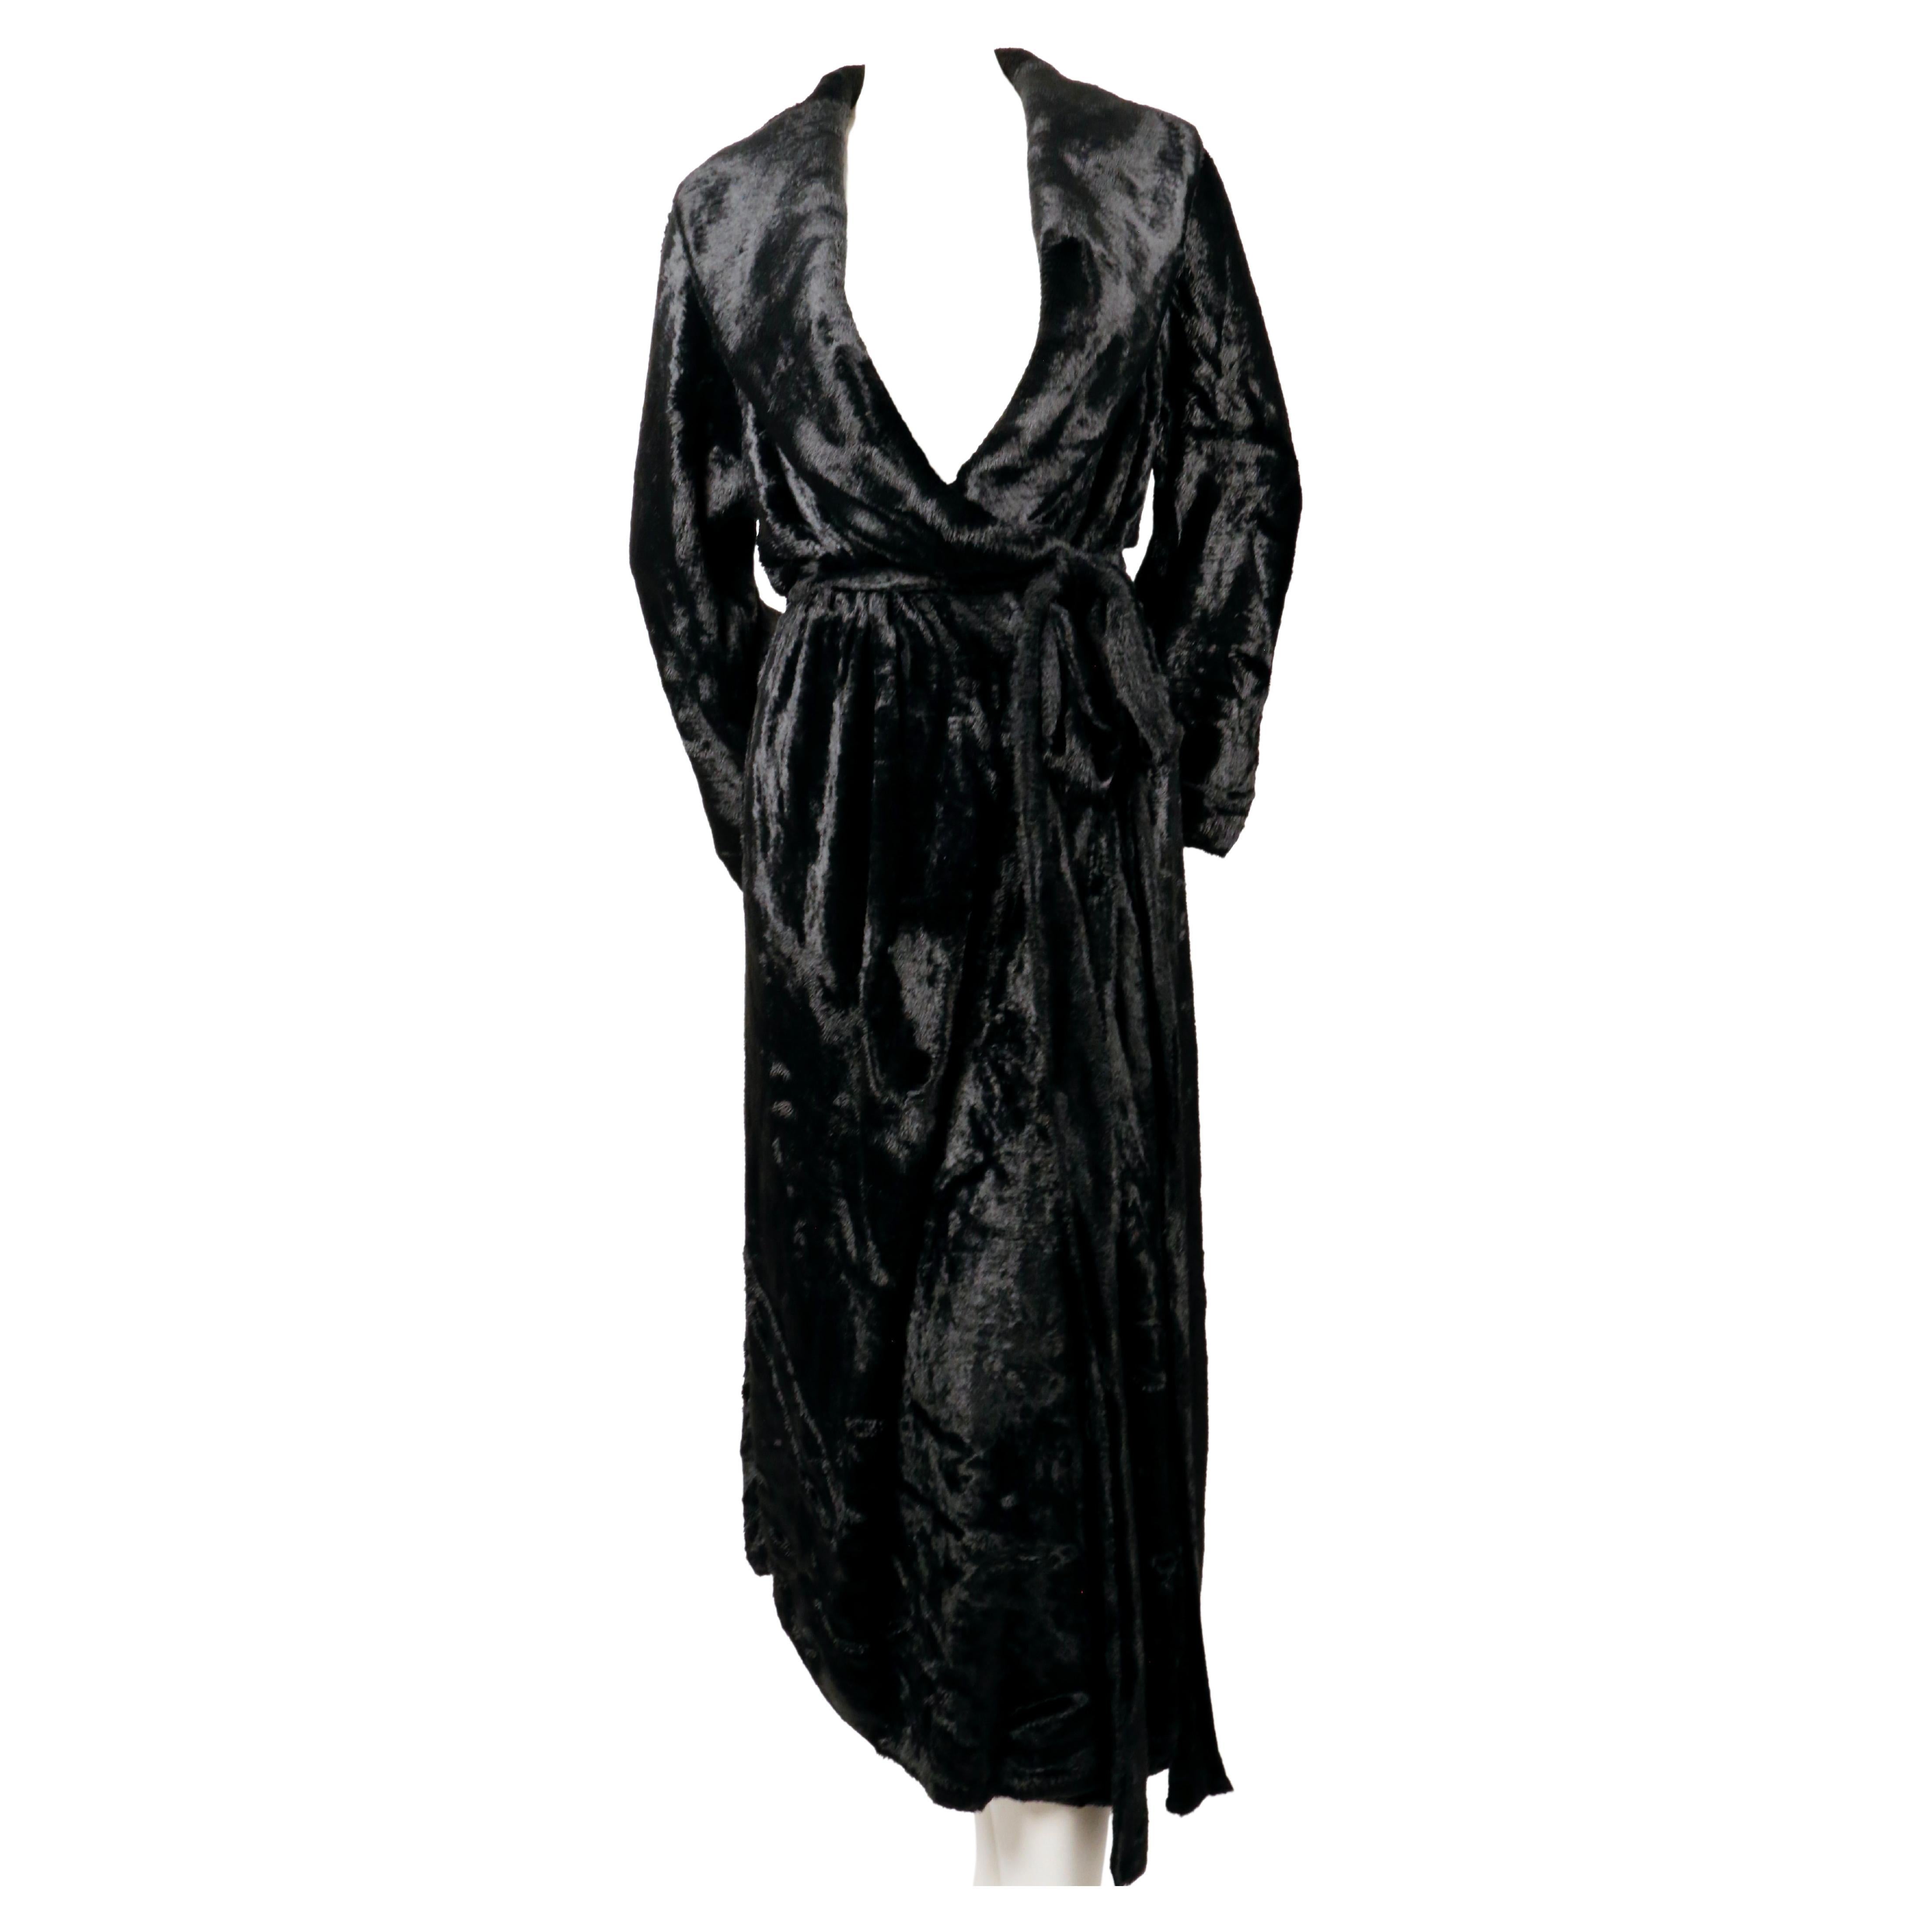 Very rare , jet-black, chenille robe coat with shawl collar and extra long belt designed by Azzedine Alaia dating to fall of 1992 as seen on the runway. Size XS but fits many sizes due to the oversized cut. Double button closure. Elasticized waist.